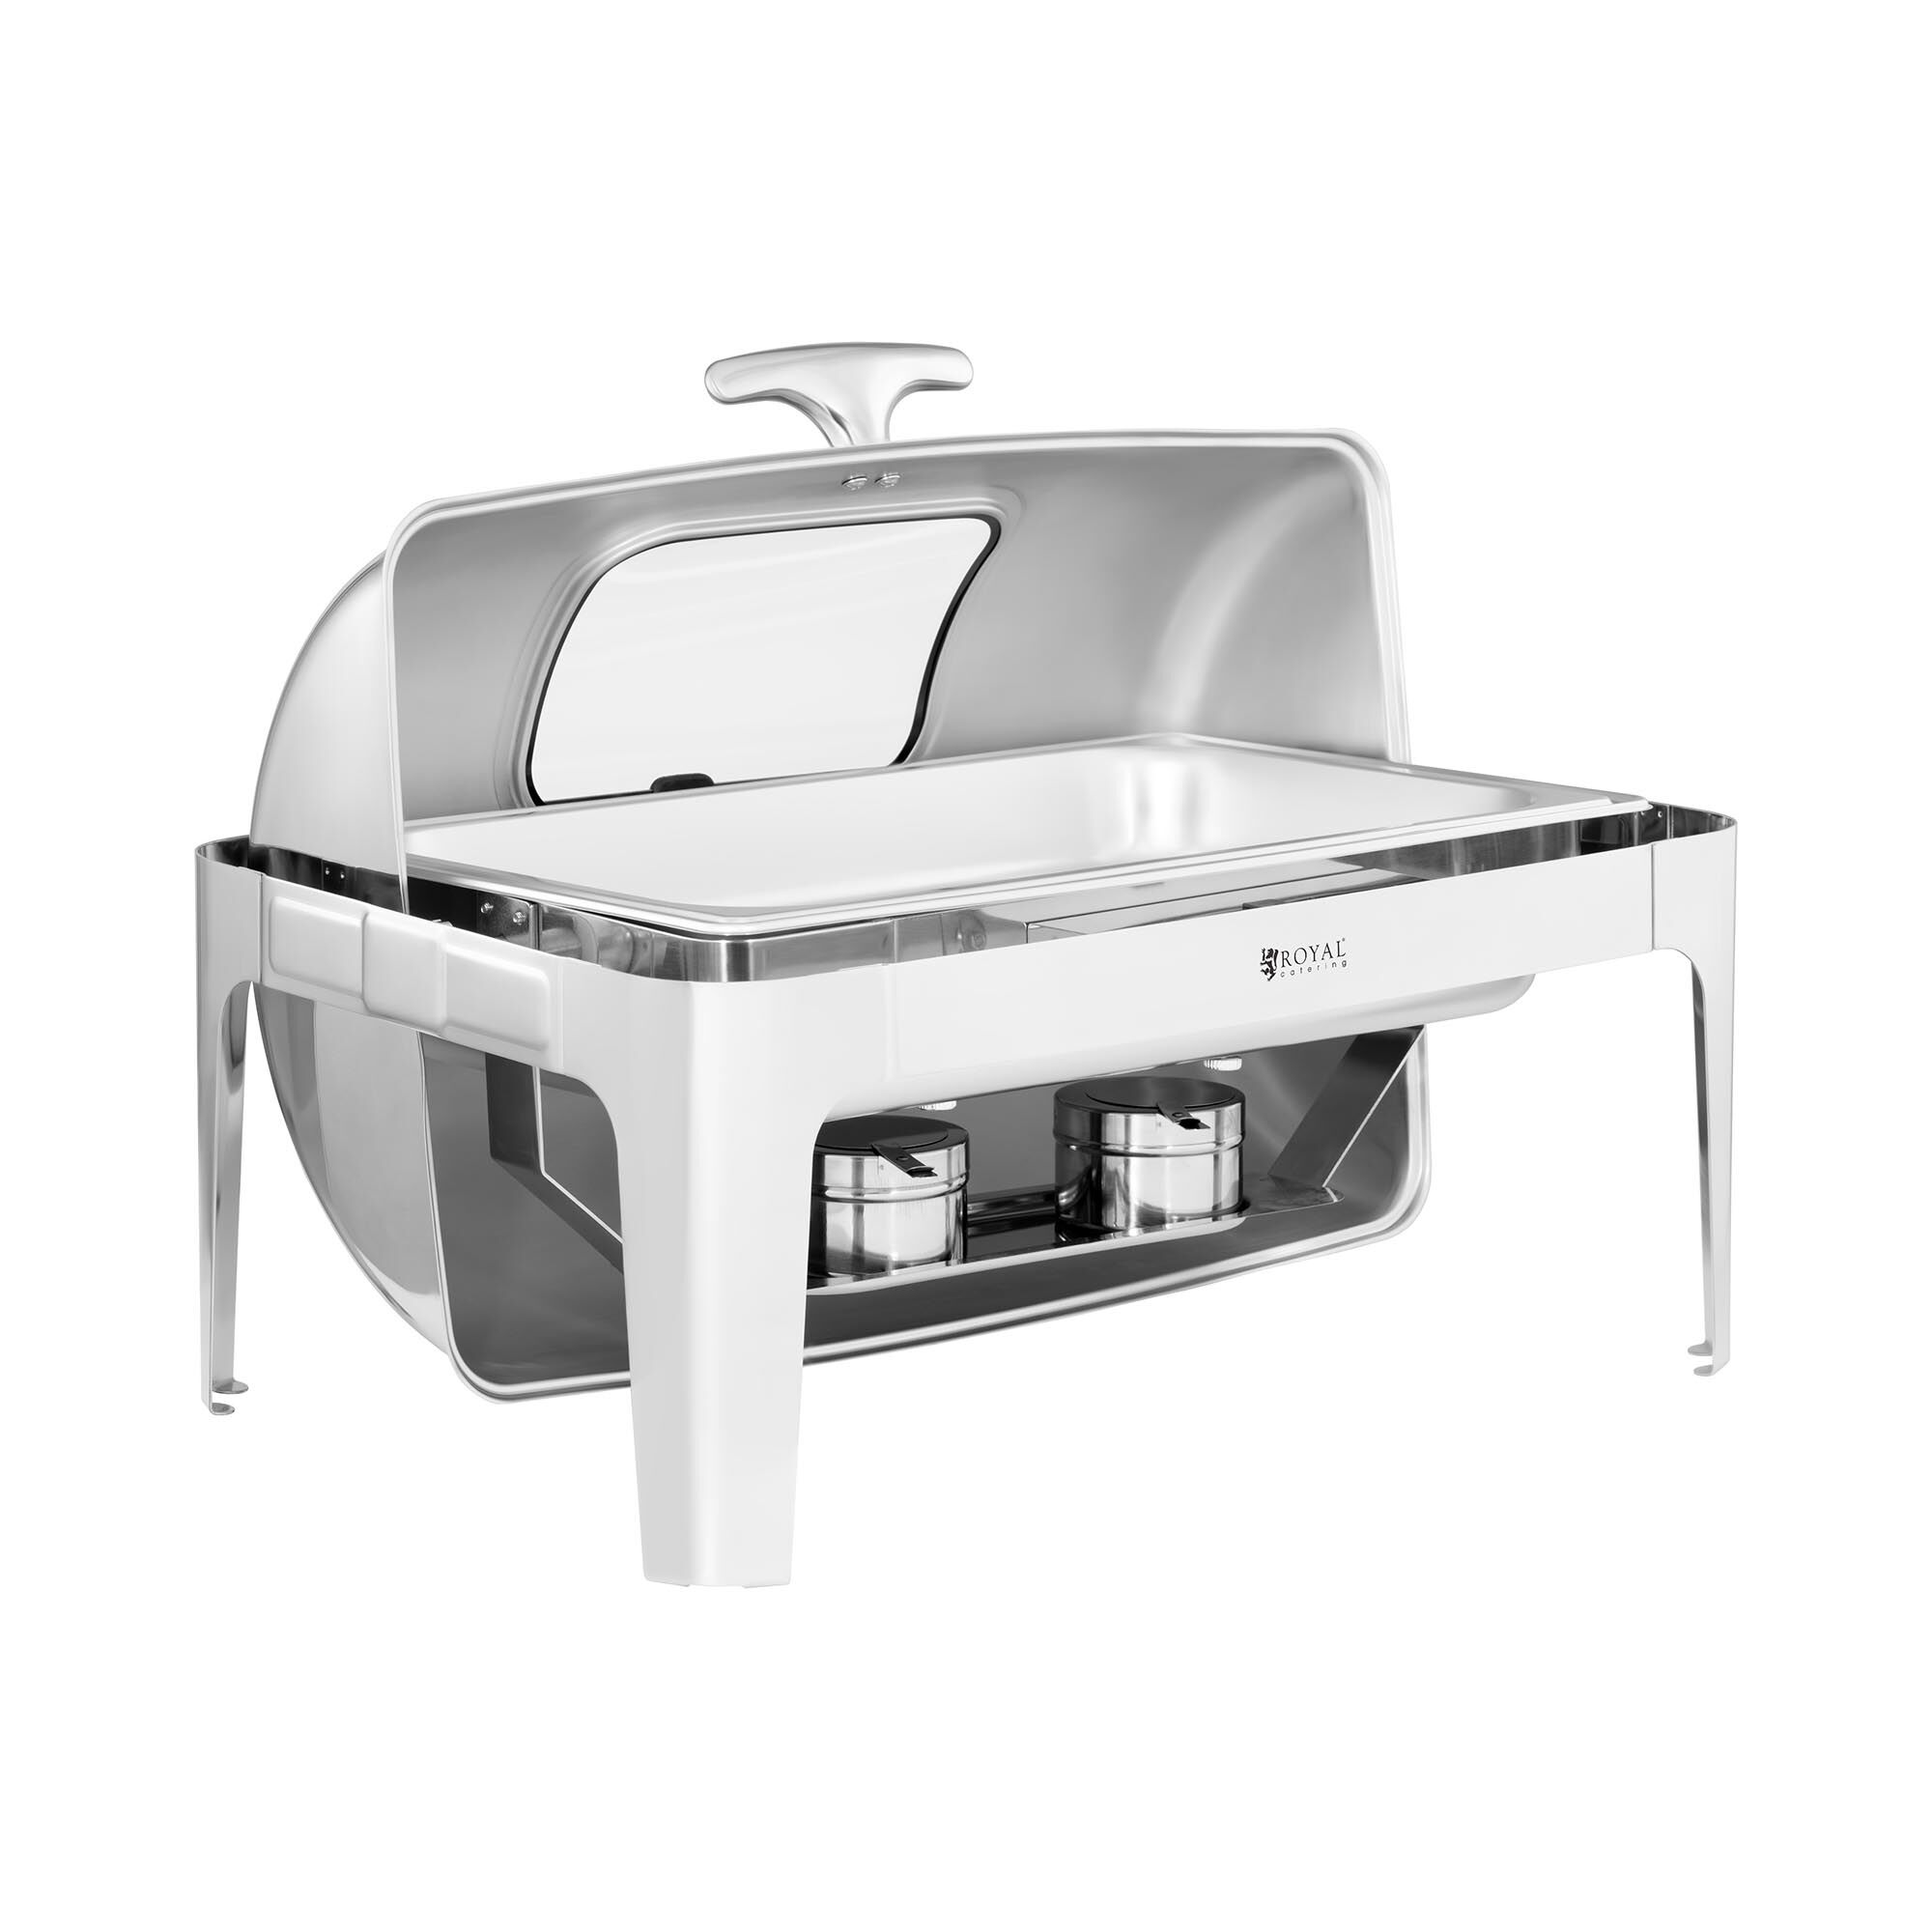 Royal Catering Chafing Dish - GN 1/1 - Royal Catering - 8,5 L - 2 Brennstoffzellen - Sichtfenster